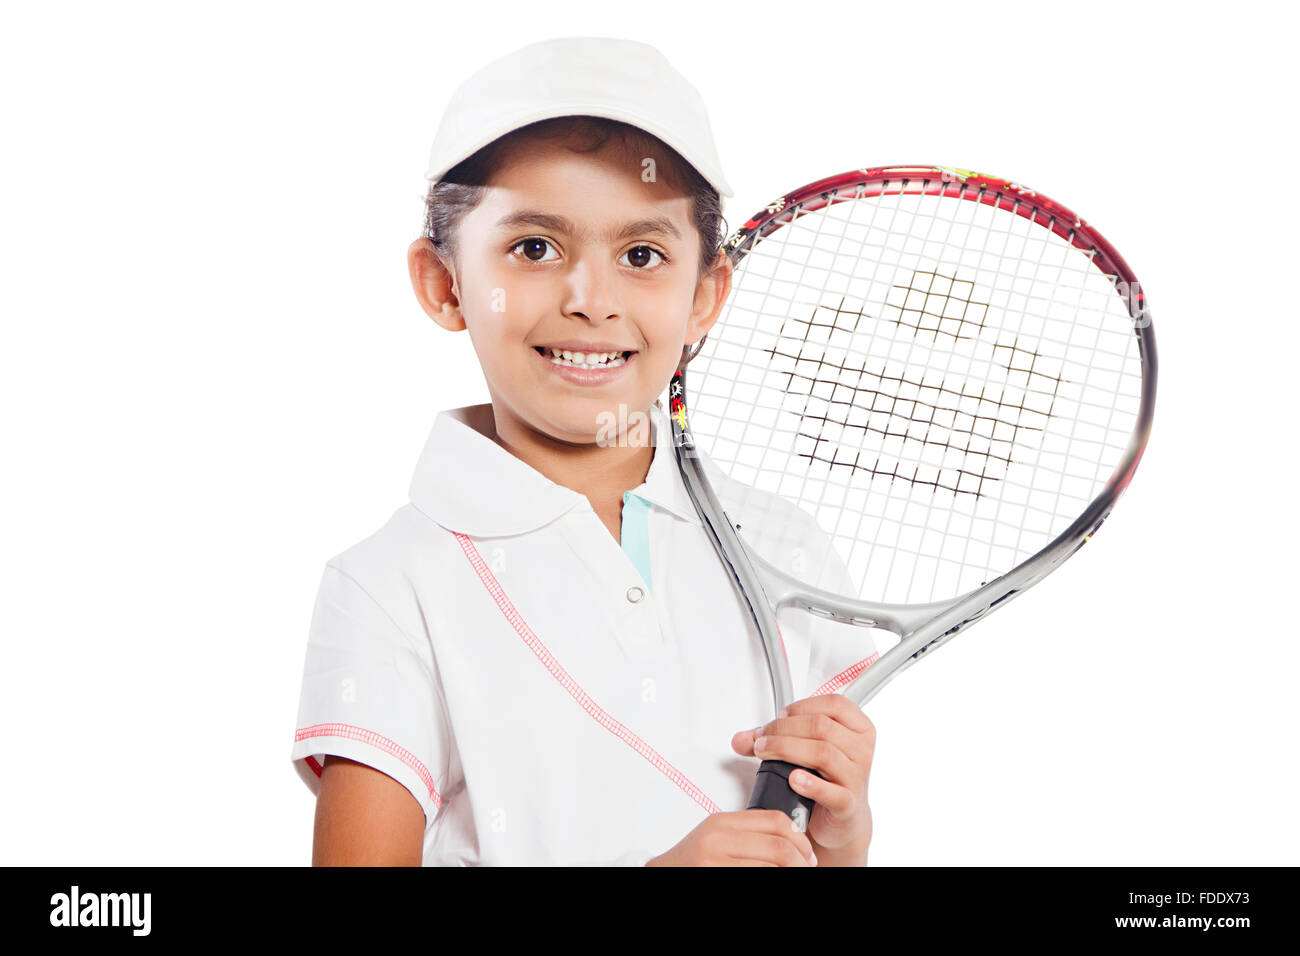 Girl hobby kid player smiling raquette tennis sports succès permanent Banque D'Images